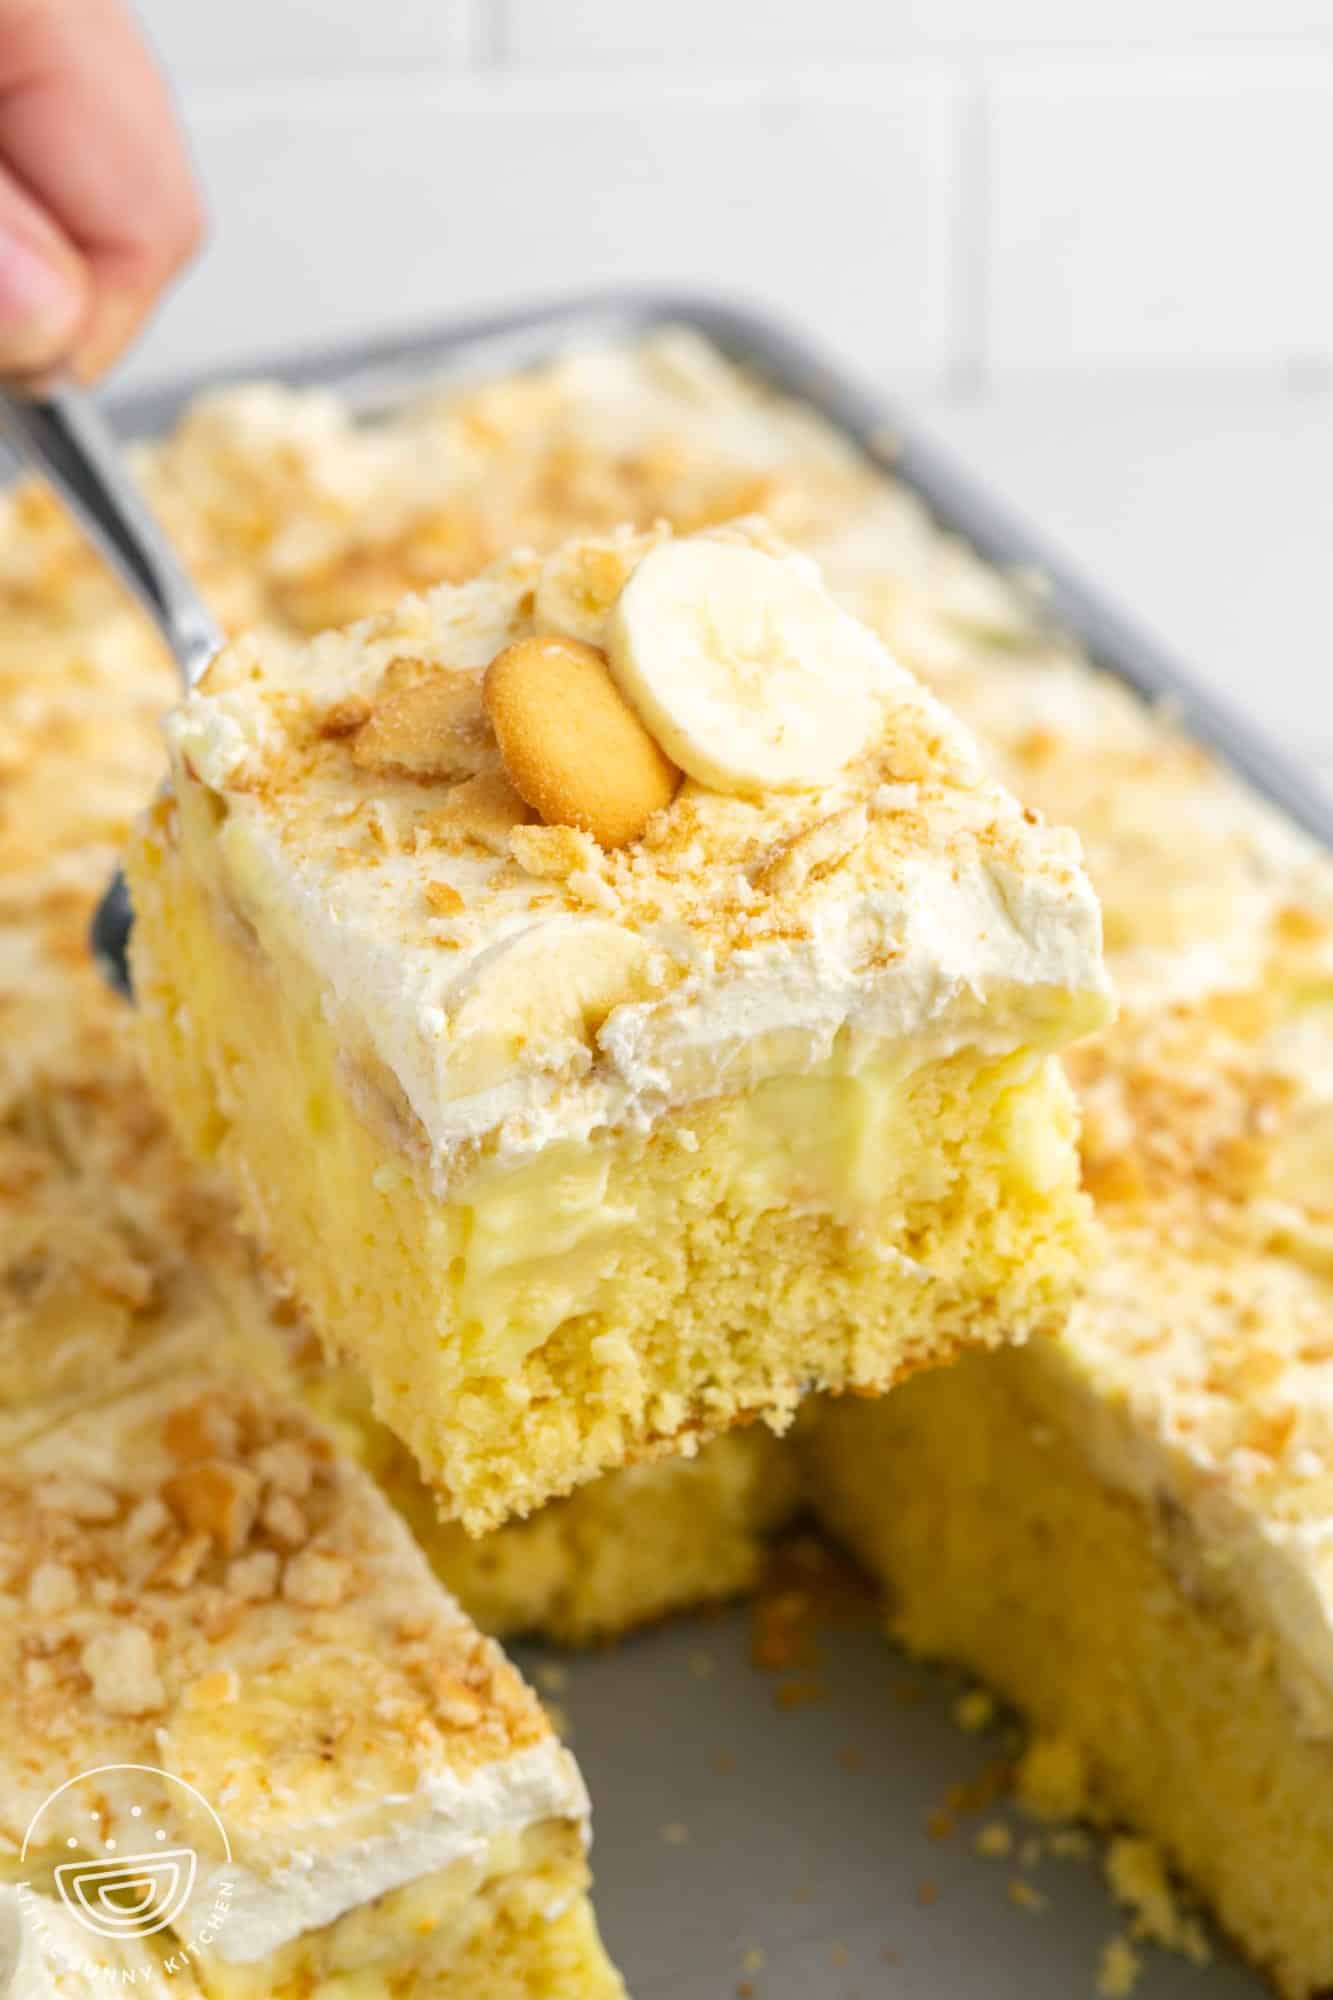 a square of cake topped with whipped cream and bananas being lifted out of the baking pan.